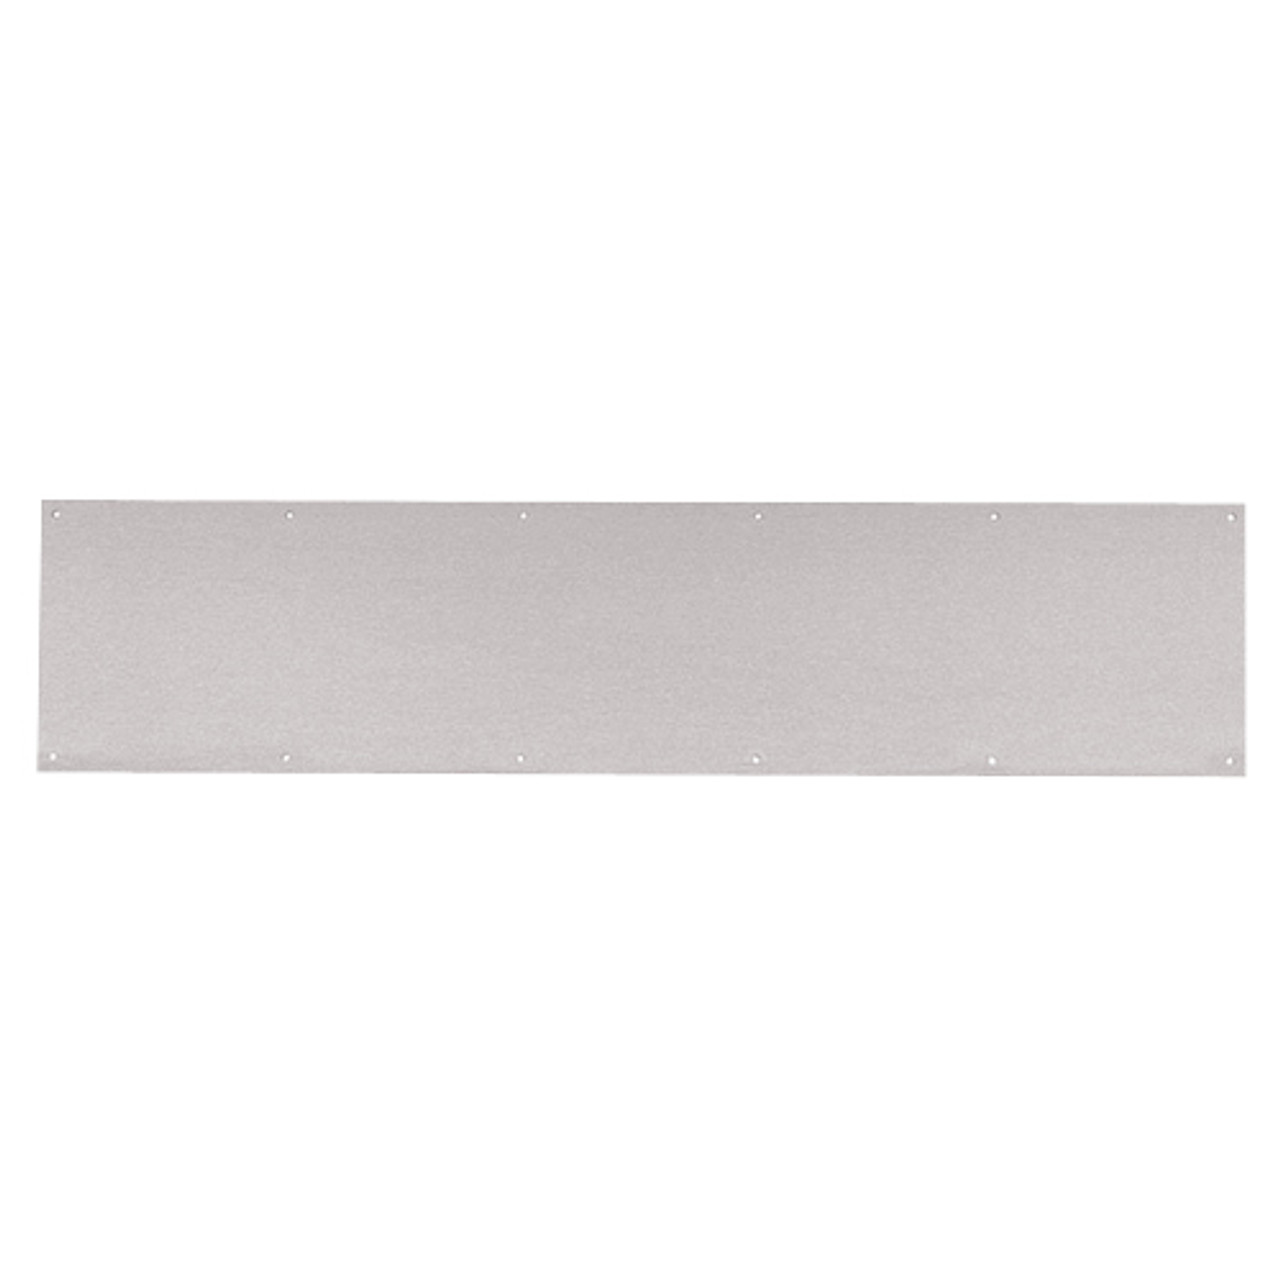 8400-US32D-14x36-B-CS Ives 8400 Series Protection Plate in Satin Stainless Steel